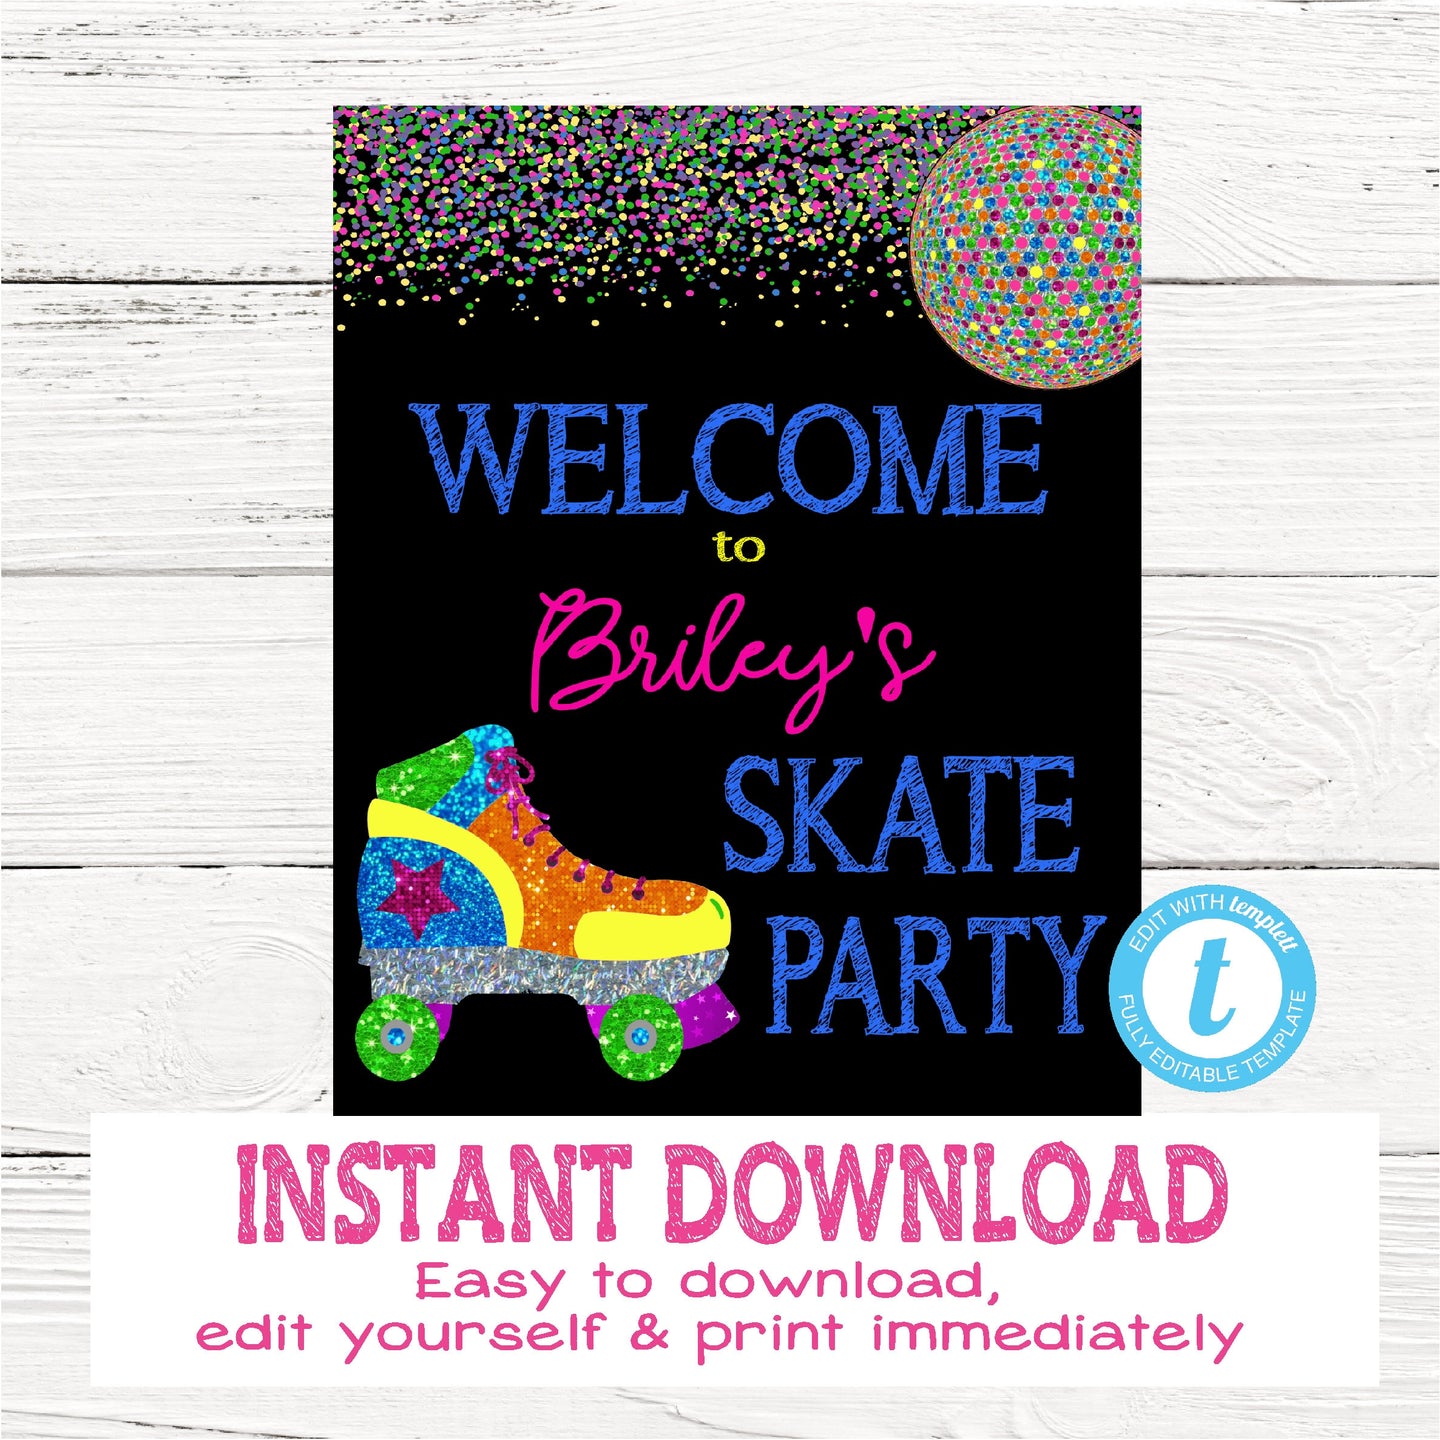 NEON Roller skating Birthday Sign| Edit Yourself 80's Skate Welcome Sign |Glow Party Birthday Party, Instant download, Neon Roller skate